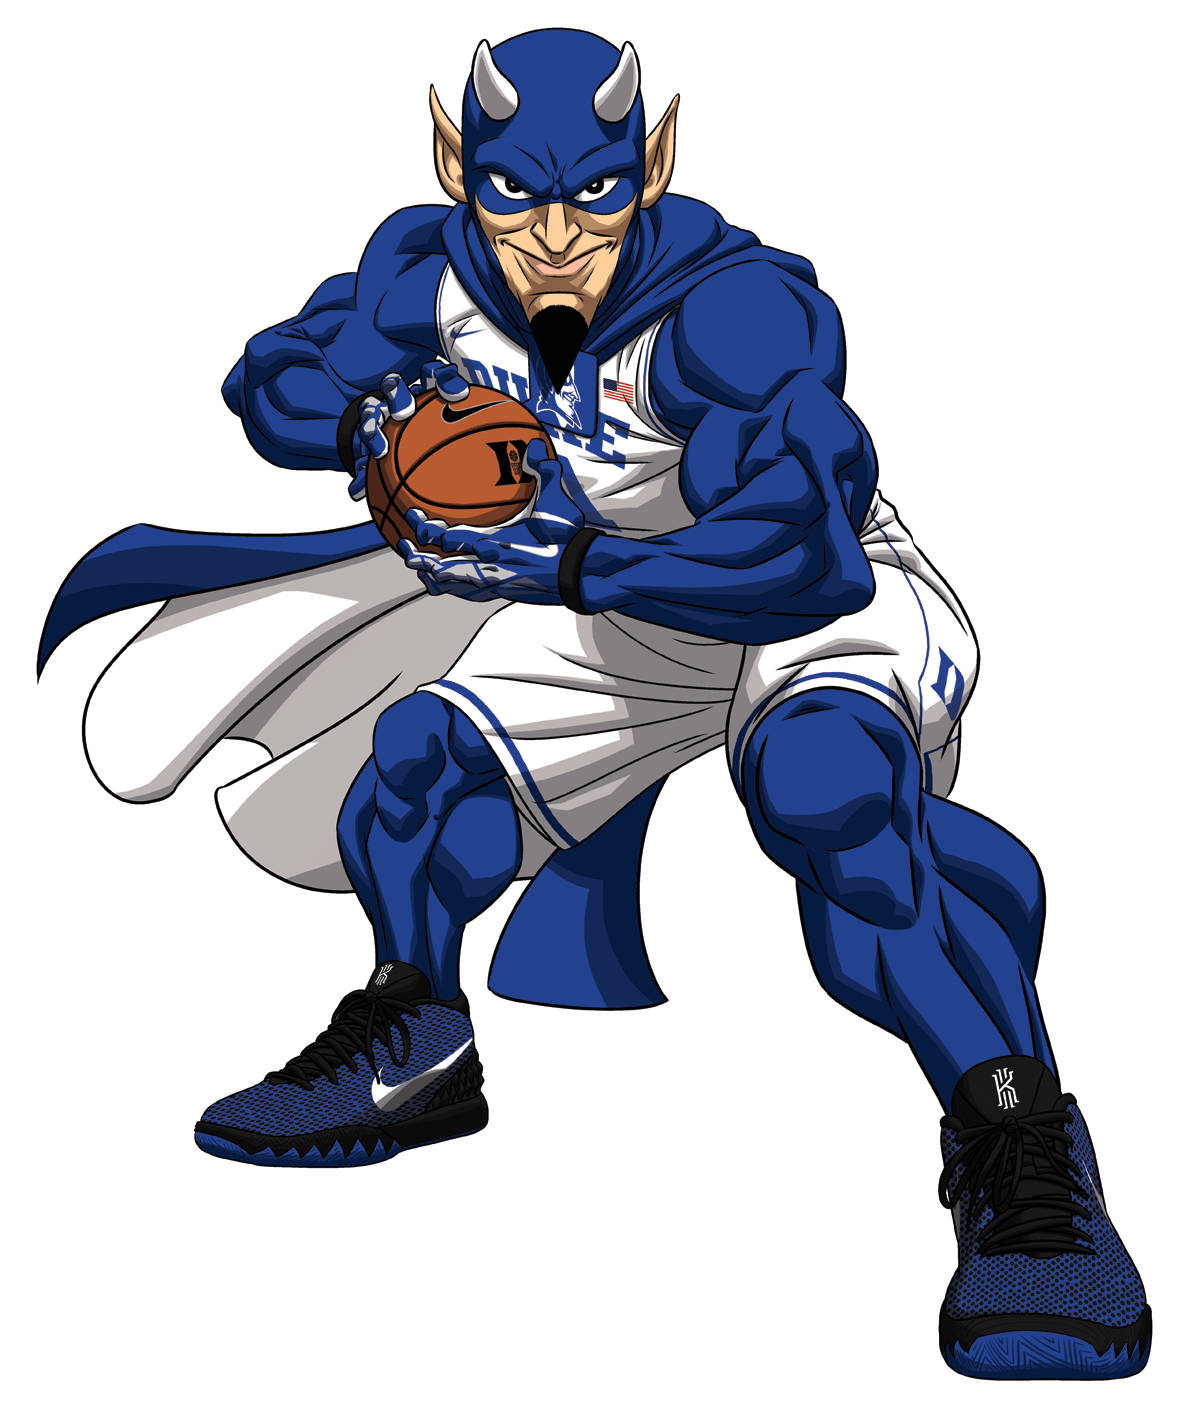 Fierce And Determined Duke Blue Devils Basketball Character Ready For Action Background